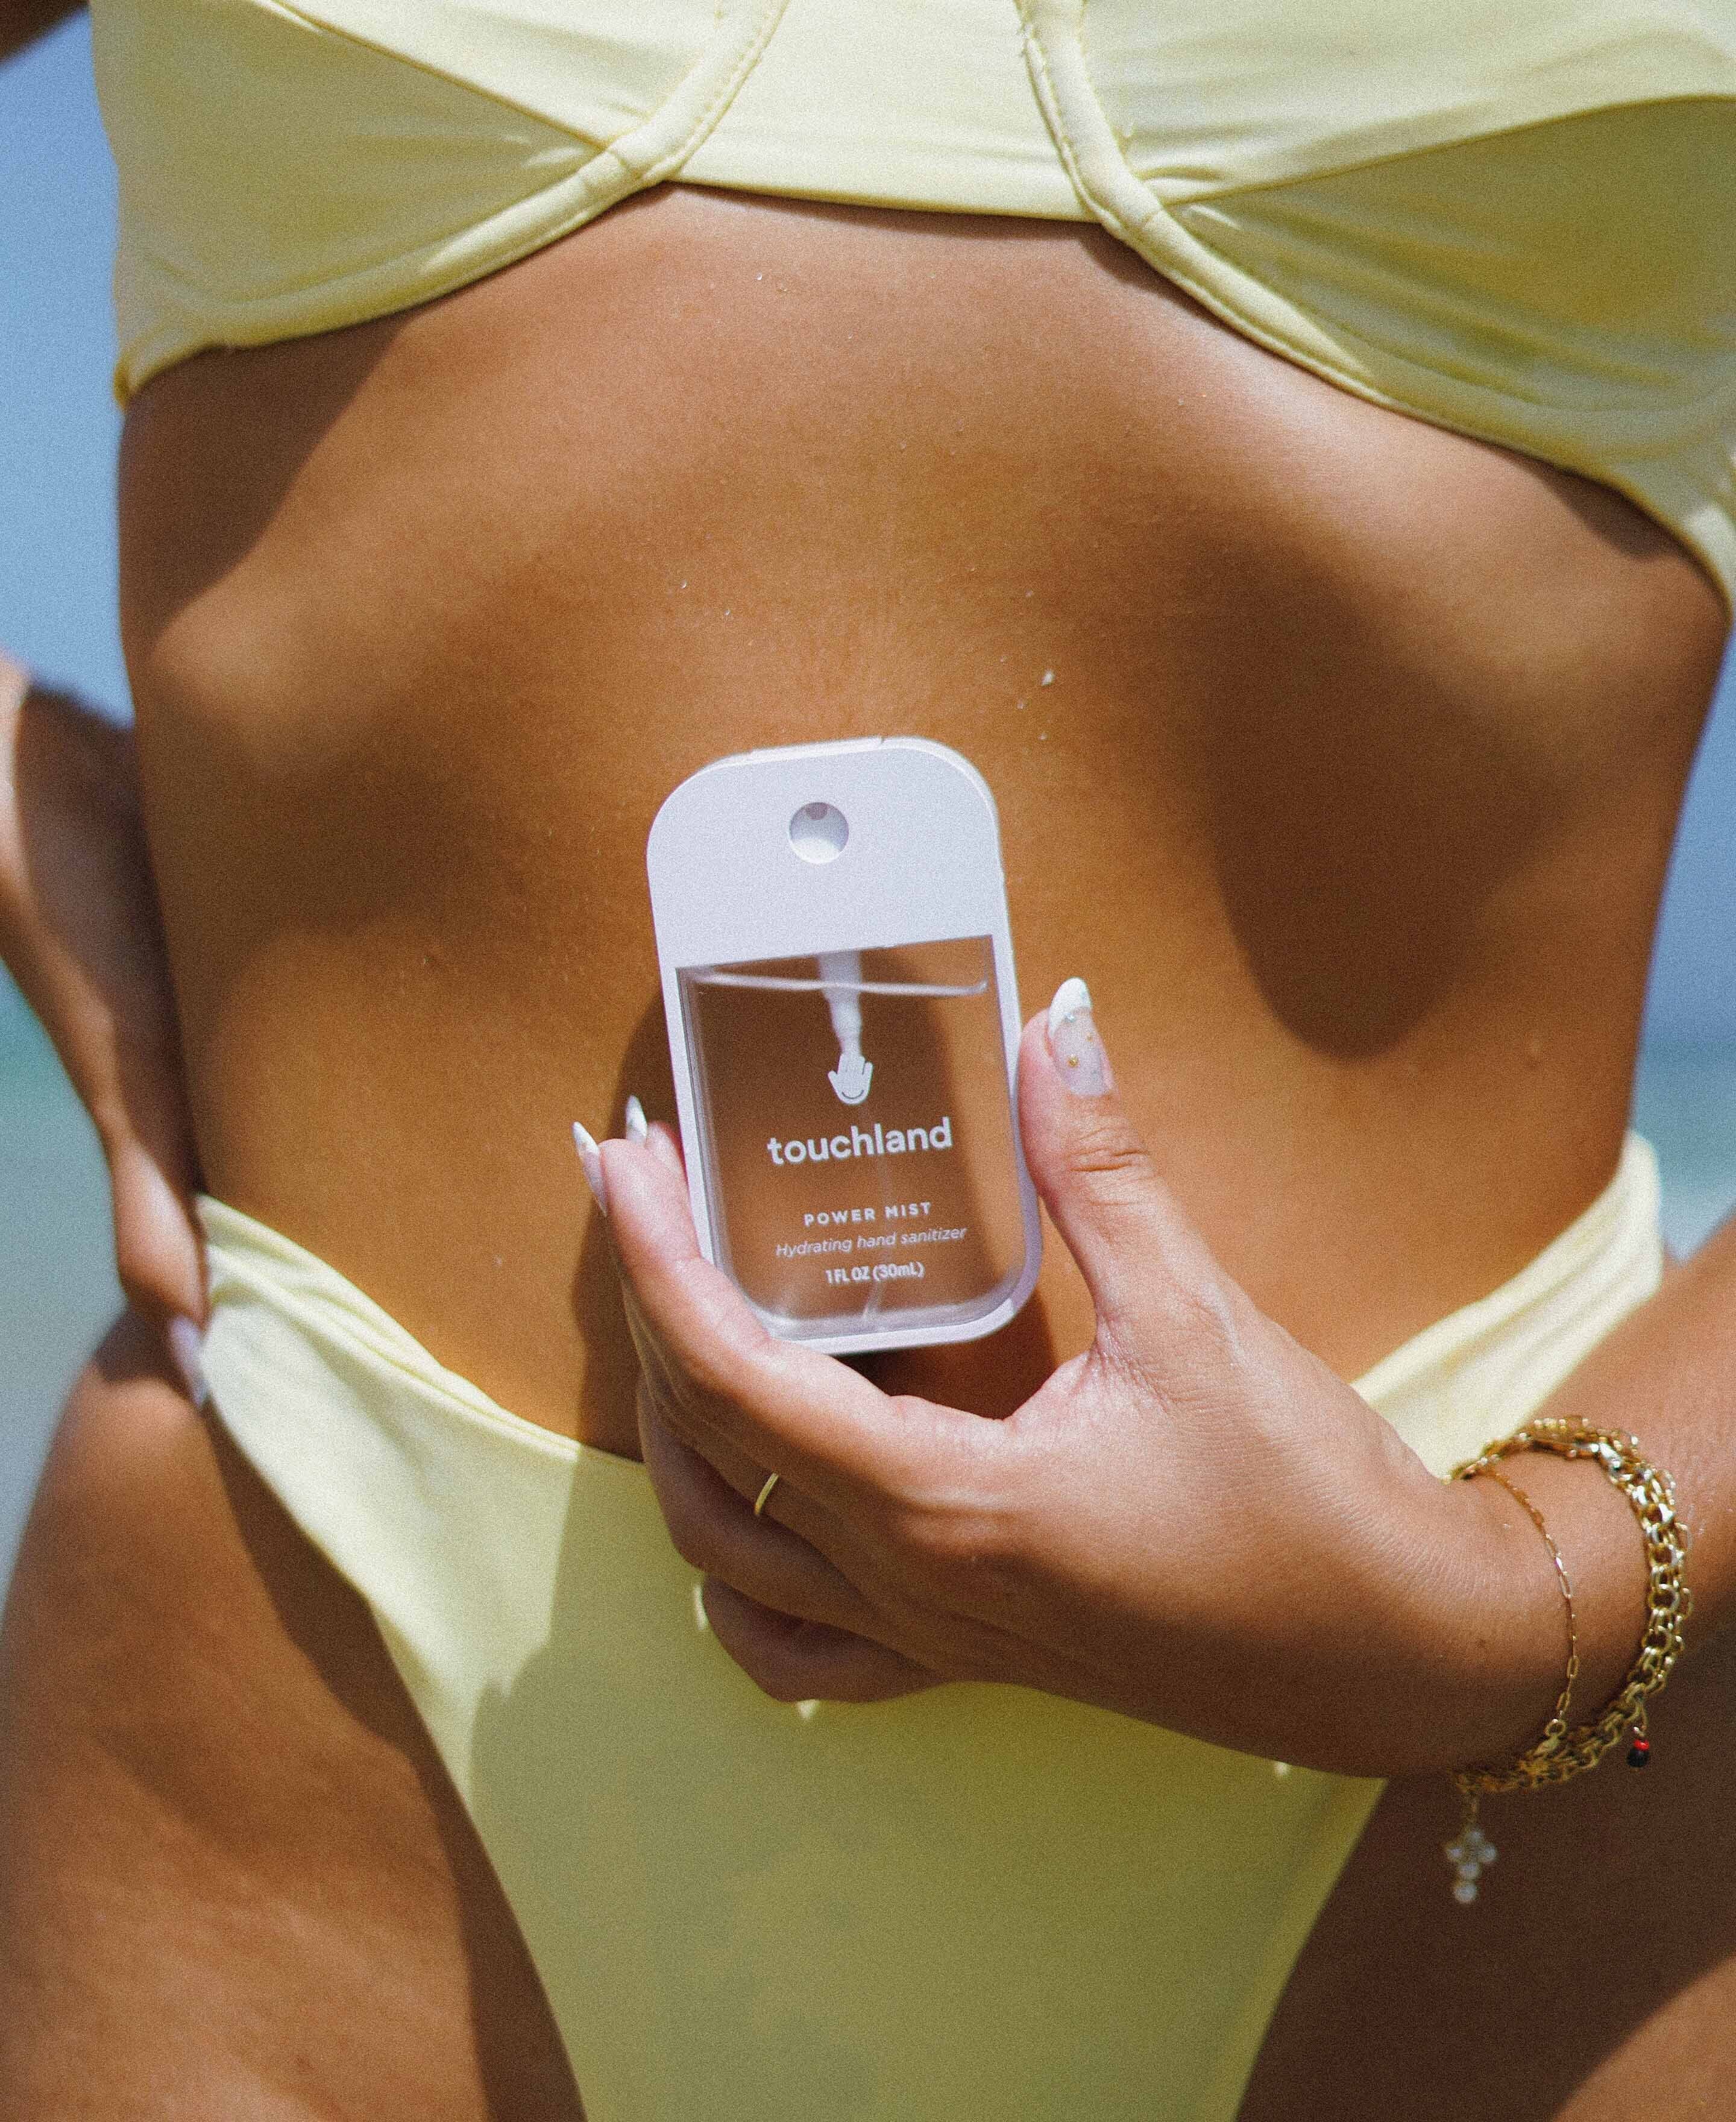 Woman with yellow bikini at the beach holding a Power Mist hand sanitizer